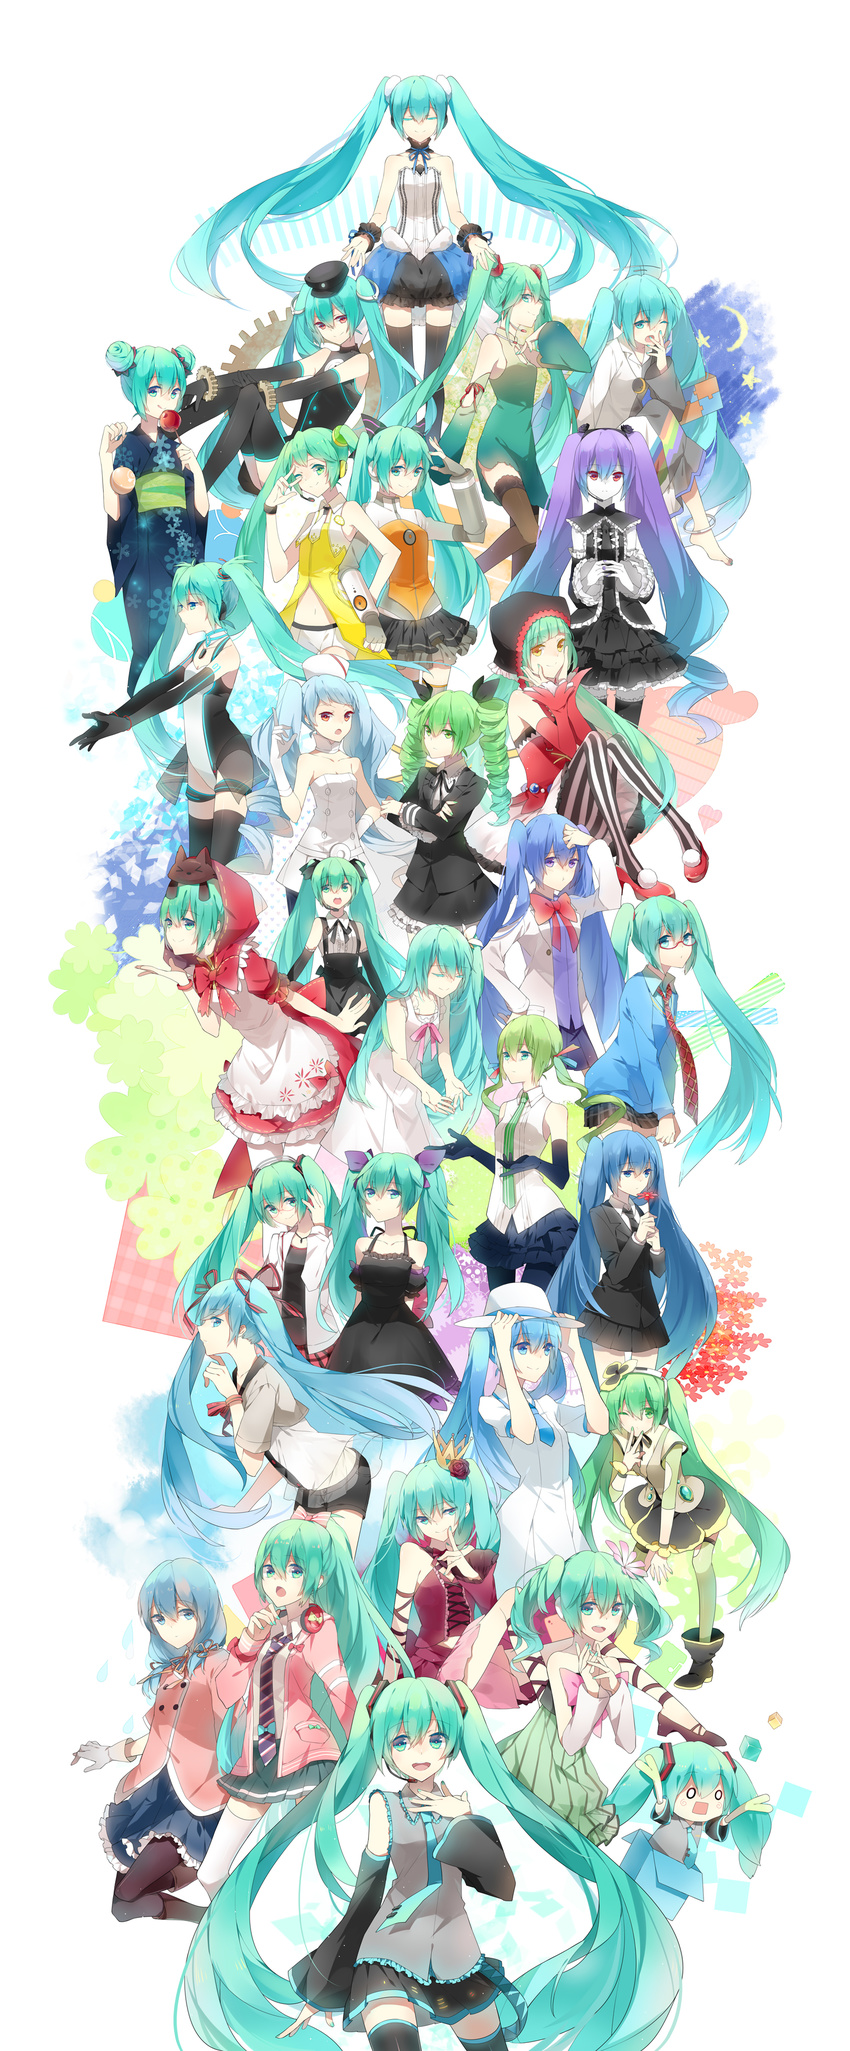 7th_dragon_(series) 7th_dragon_2020 absurdres acute_(vocaloid) bad_id bad_pixiv_id candy_apple cat_food_(vocaloid) closed_eyes colorful_drop_(module) colorful_x_melody_(vocaloid) cosplay crown detached_sleeves dou_iu_koto_nano!?_(vocaloid) dress elbow_gloves flower food frills gears glasses gloves goodsmile_company goodsmile_racing gothic_(module) grimm's_fairy_tales hachune_miku hair_flower hair_ornament hair_ribbon hand_on_hip hat hatsune_miku hatsune_miku_no_gekishou_(vocaloid) headset highres himitsu_keisatsu_(vocaloid) infinity_(module) japanese_clothes jewelry kimono kocchi_muite_baby_(vocaloid) koiiro_byoutou_(vocaloid) kyodai_shoujo_(vocaloid) lace lace-trimmed_thighhighs leaning_forward leotard little_red_riding_hood little_red_riding_hood_(grimm) little_red_riding_hood_(grimm)_(cosplay) long_hair mikuzukin_(module) monochro_blue_sky_(vocaloid) multiple_girls natural_(module) navel necklace necktie negapoji_continues_(vocaloid) nurse odds_&amp;_ends_(vocaloid) one_eye_closed open_mouth p0ckylo pantyhose project_diva project_diva_(series) project_diva_2nd project_diva_extend project_diva_f puzzle_(vocaloid) race_queen racing_miku racing_miku_(2011) ribbon ribbon_girl_(module) romeo_to_cinderella_(vocaloid) sadistic_music_factory_(vocaloid) saihate_(vocaloid) sekiranun_graffiti_(vocaloid) shorts sitting skirt smile songover spacey_nurse_(module) spring_onion striped striped_legwear suigyoku_(module) thighhighs time_machine_(vocaloid) twintails v vertical-striped_legwear vertical_stripes very_long_hair vintage_dress_(module) vocaloid weekender_girl_(vocaloid) white_one-piece_(module) world's_end_dancehall_(vocaloid) world's_end_umbrella_(vocaloid) yawning yellow_(vocaloid) yukata